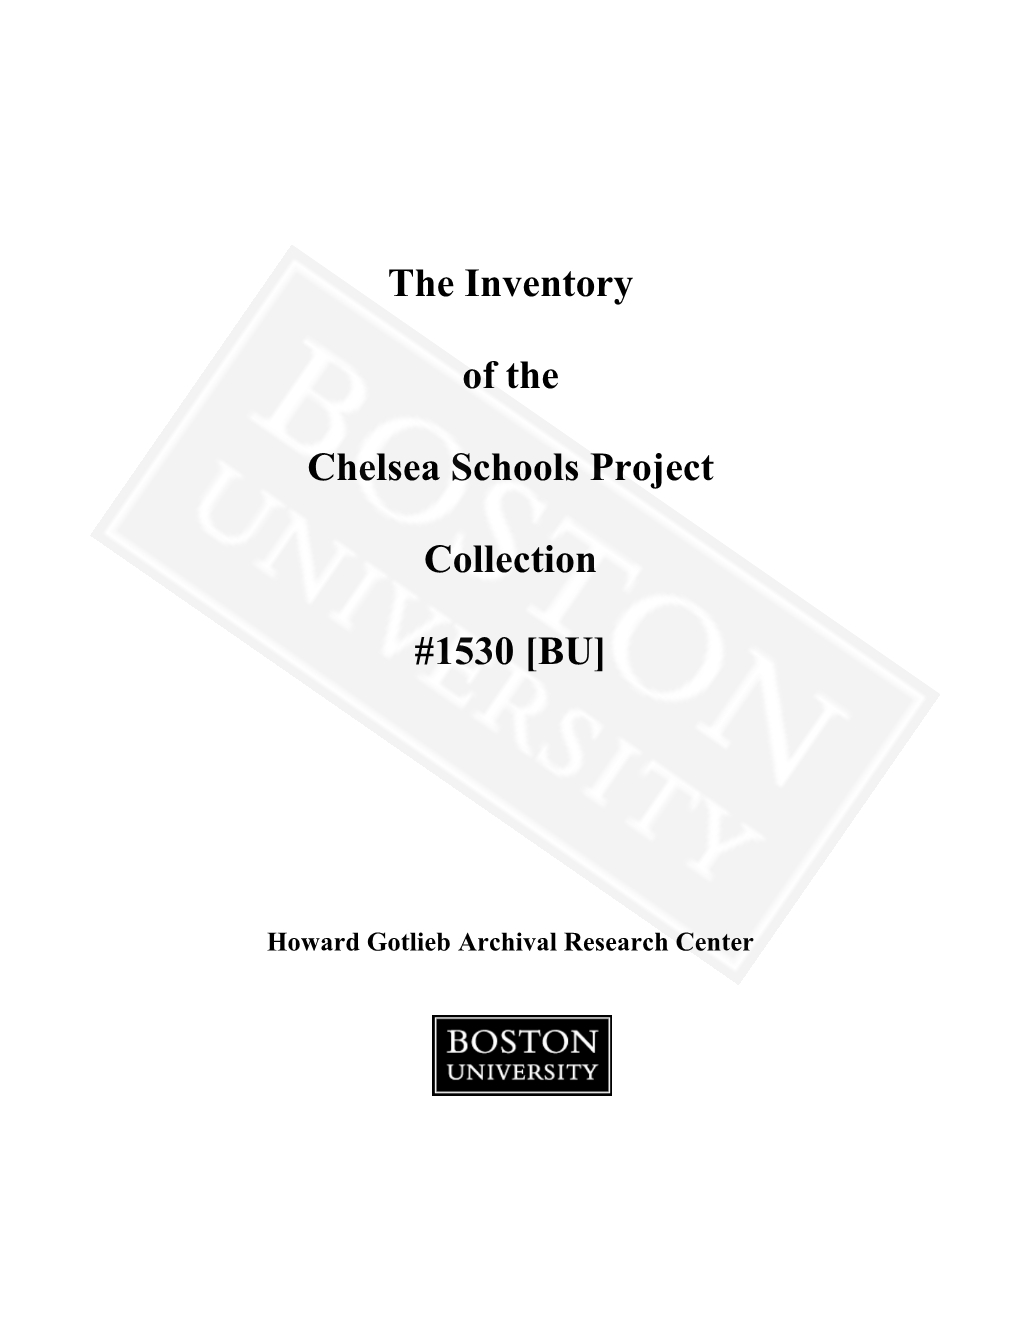 The Inventory of the Chelsea Schools Project Collection #1530 [BU]